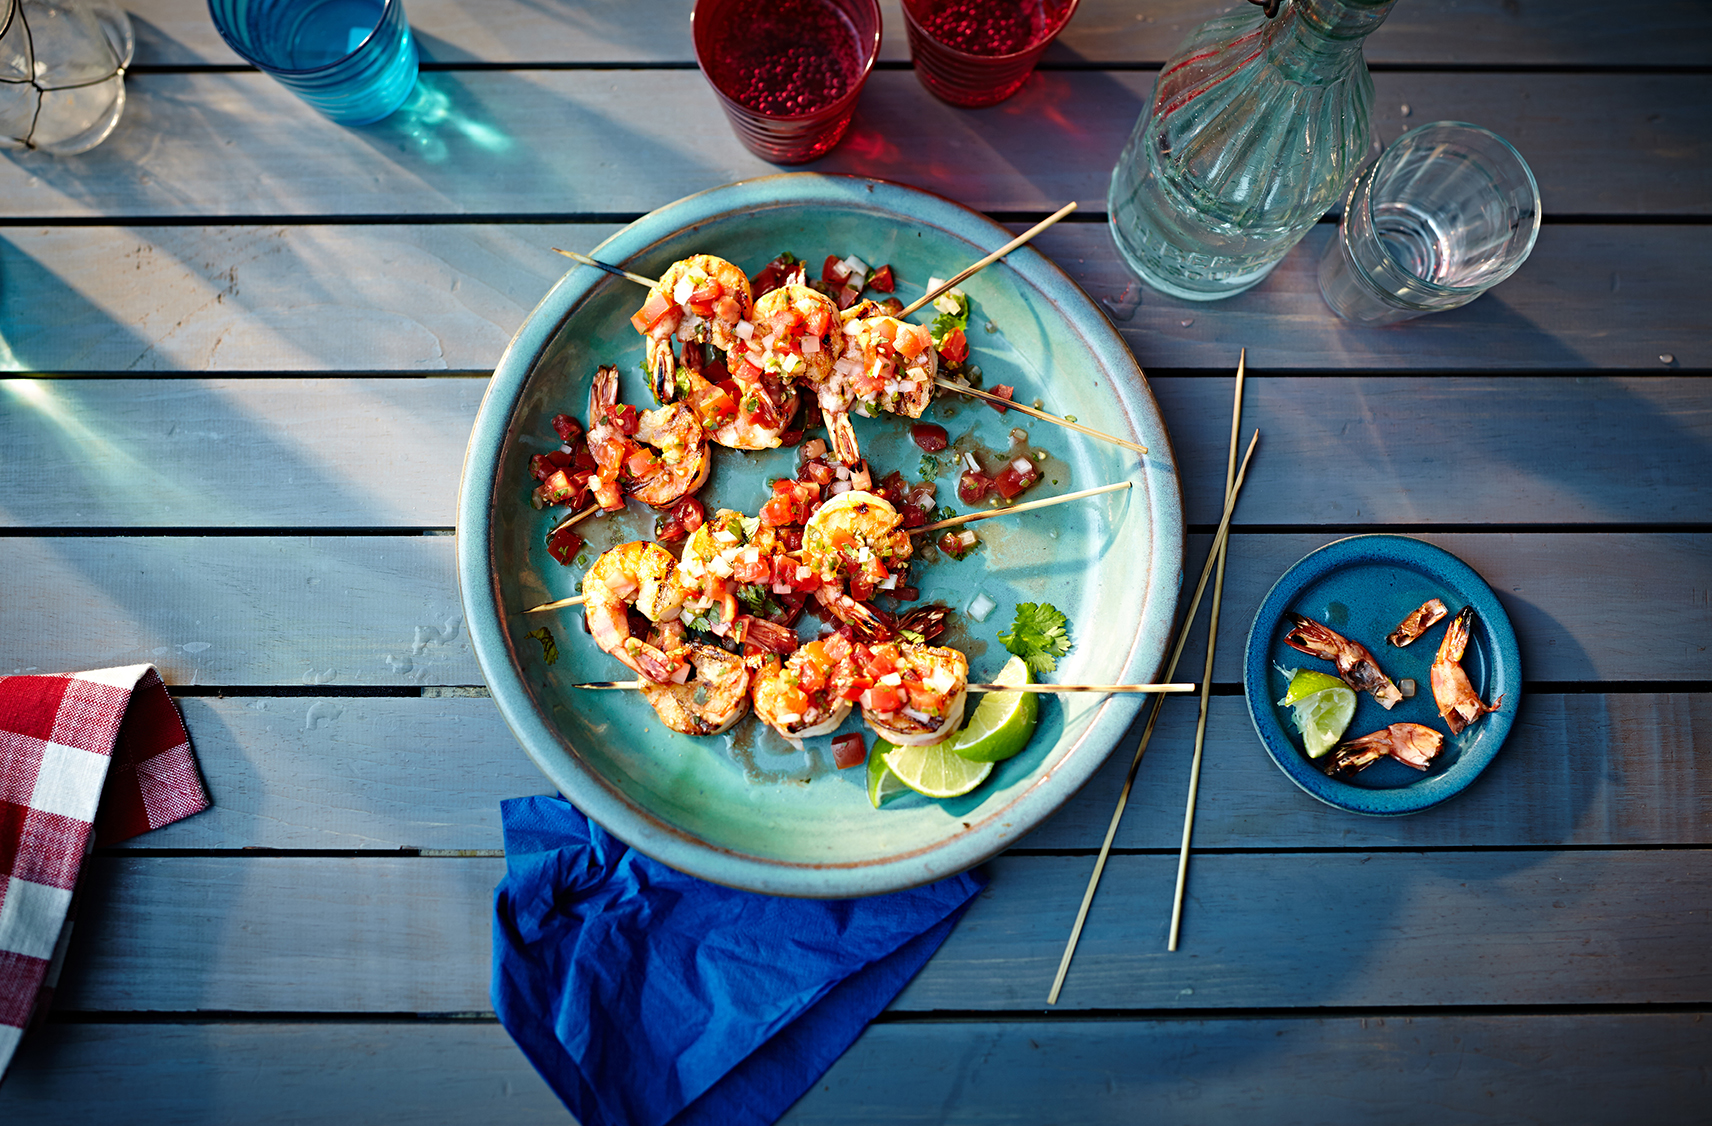 Skewers of grilled shrimp topped with pico de gallo on a plate